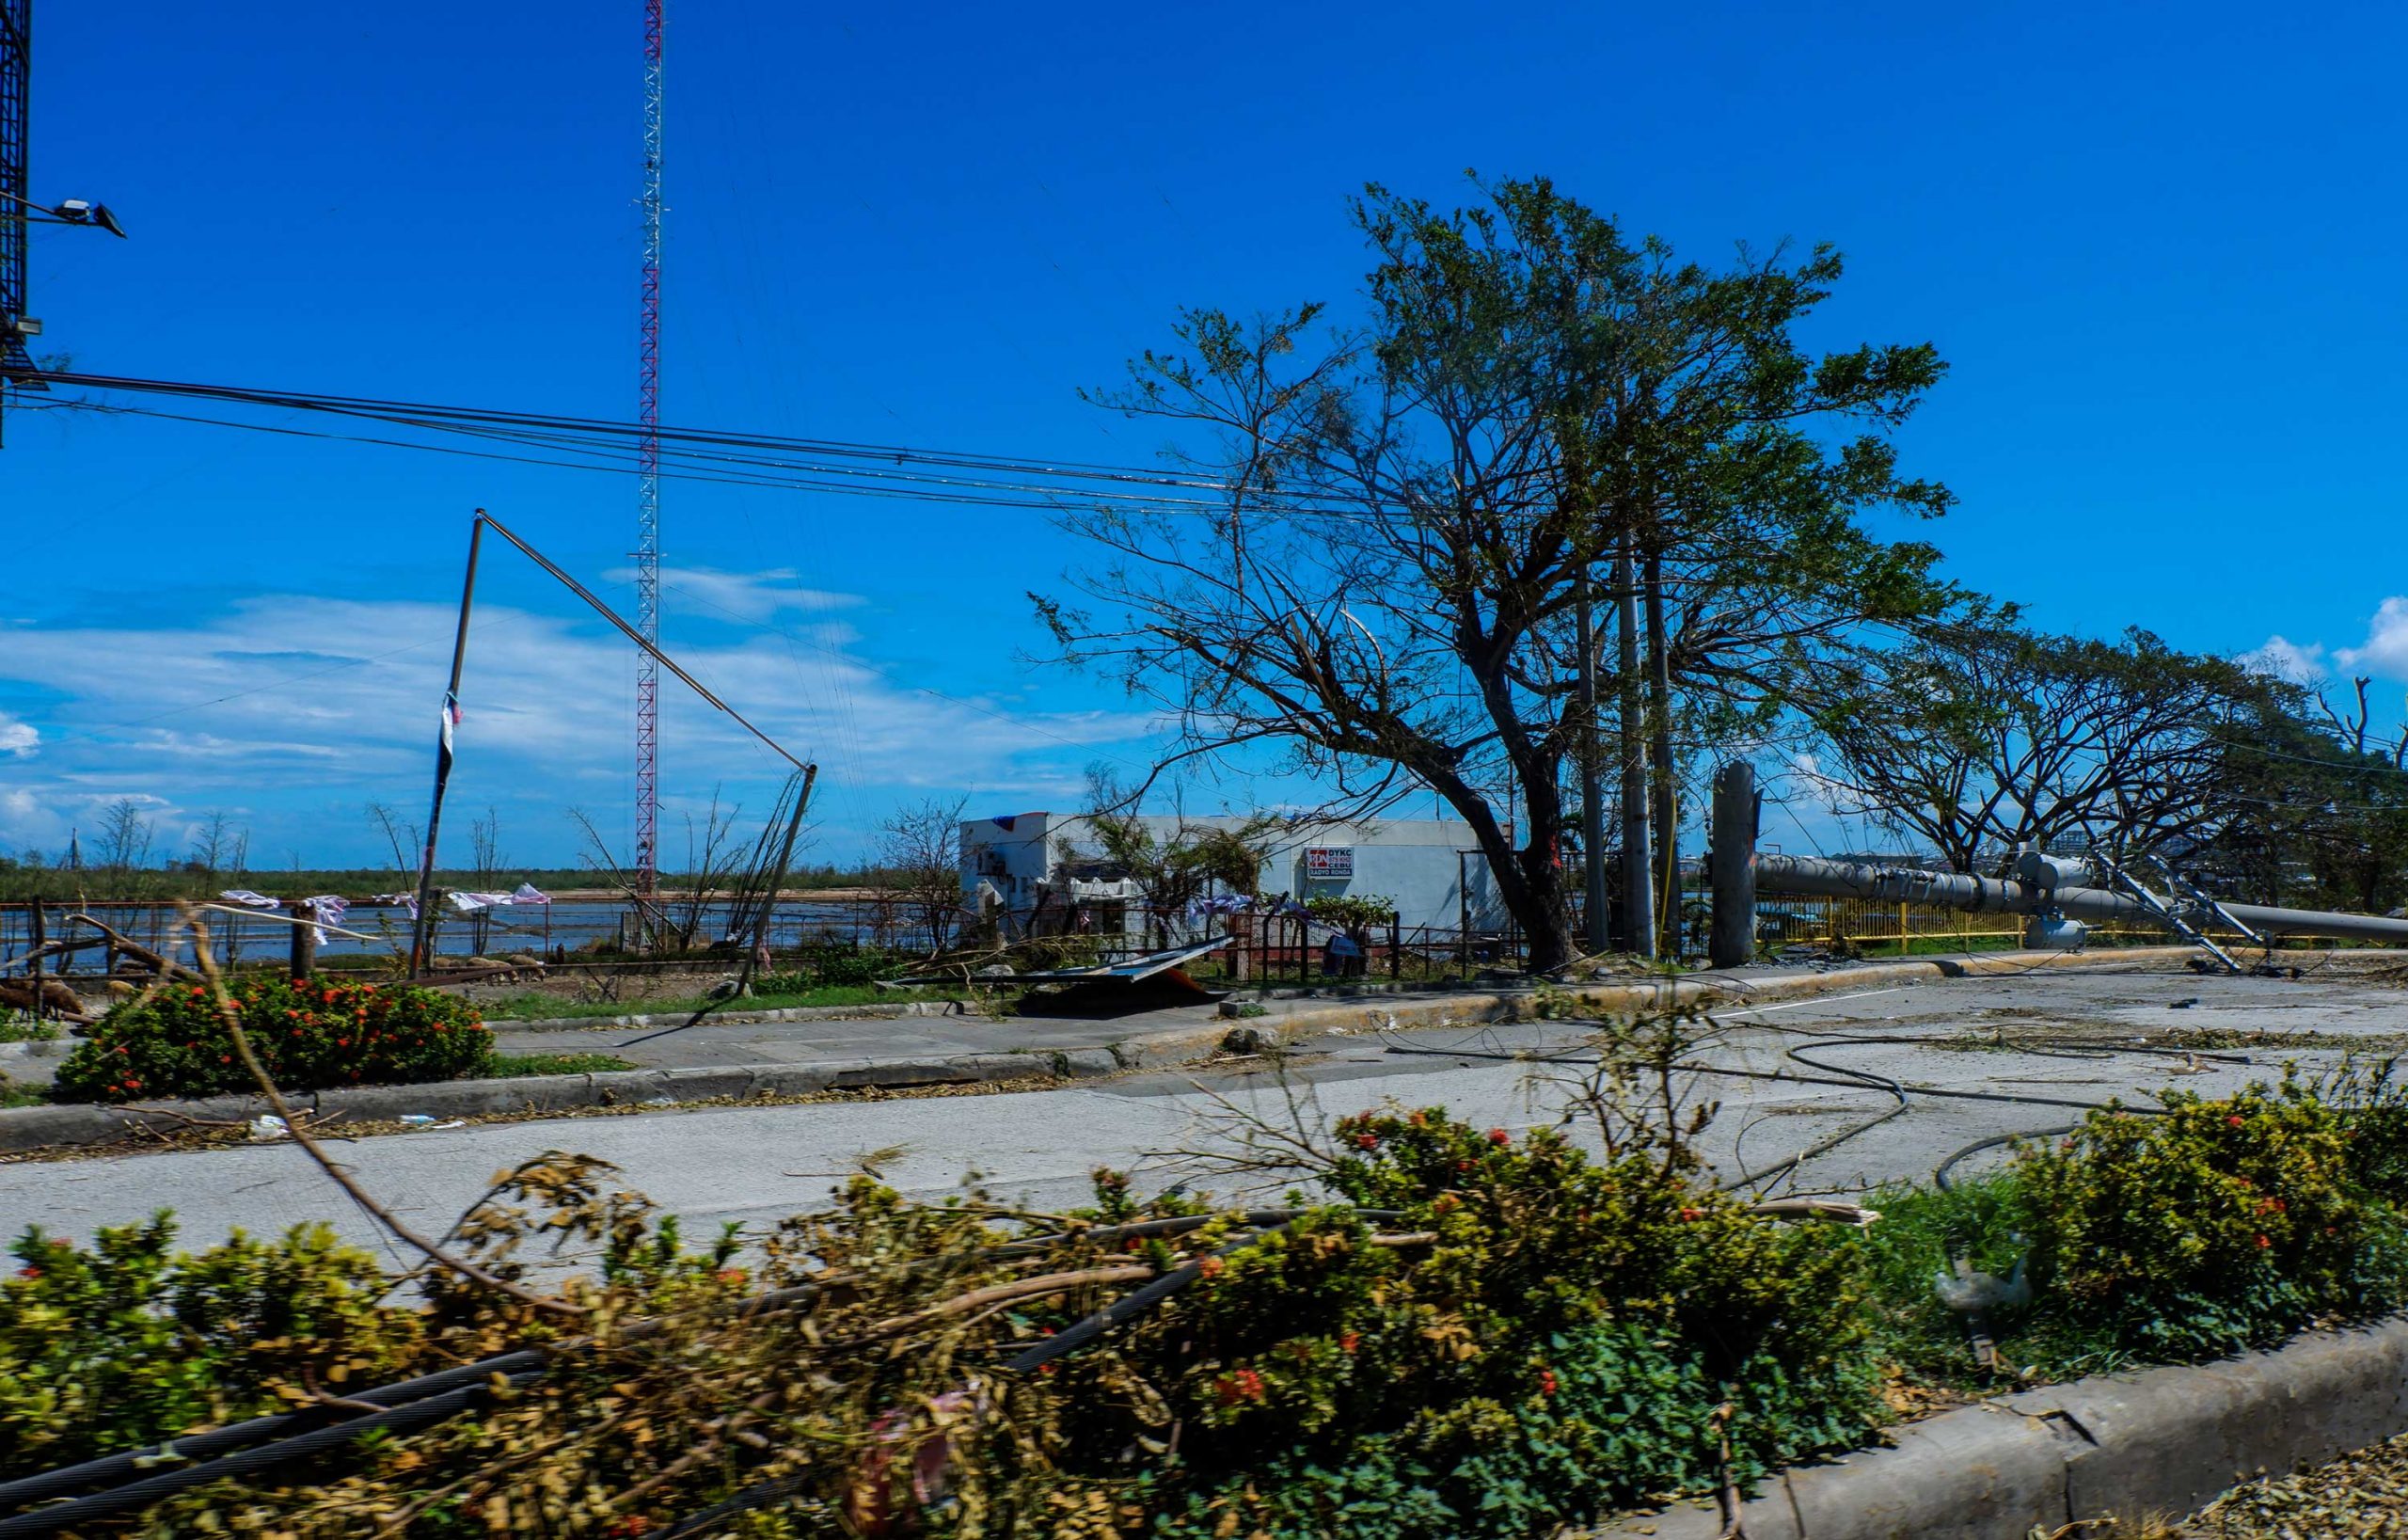 Globe to complete restoration of services in Odette hit areas this month